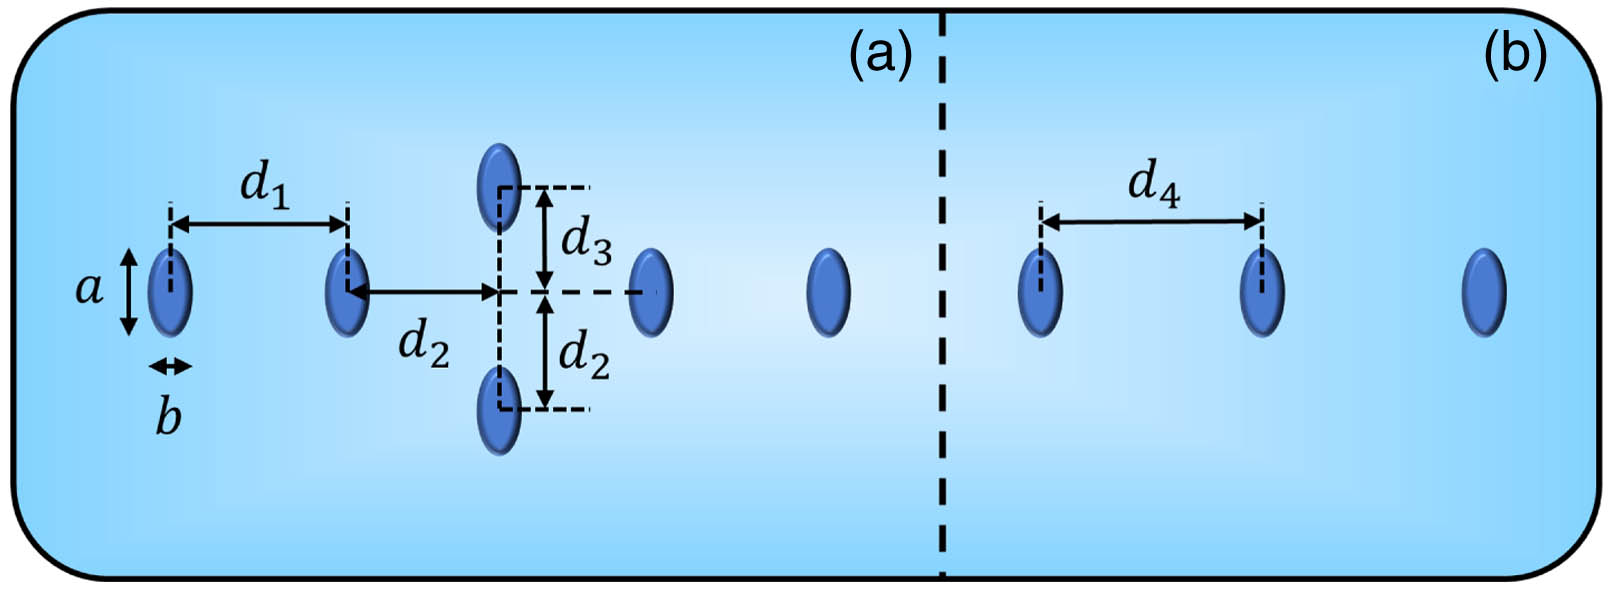 Optical implementation of the SUSY arrays example shown in Fig. 1 using a waveguide platform. The left panel shows the original array while right panel shows the BD-SUSY partner obtained as described in the text. The waveguides are all identical, having an elliptic geometry with main/minor diameters of 12 and 6 μm, respectively. The core and cladding refractive indices are taken to be ncore=1.461 and nclad=1.46, respectively [24,25]. Each waveguide supports only one optical mode for each polarization direction. Finally, the distances shown in panel (a) are: d1=23.765 μm, d2=18.275 μm, and d3=16.190 μm. These design parameters result in the following coupling coefficients: κ12=14.143 m−1, κ23=13.141 m−1, and κ24=10.000 m−1. The second order nearest next neighbor coupling is found to be below 10% of the above values. Similarly, in panel (b) we have: d4=22.425 μm and κ12=20.012 m−1. Note that we list the above values with high precision as per our numerical simulations; however, in practice the weakly guiding nature of the structure provides reasonable robustness against fabrication tolerance.